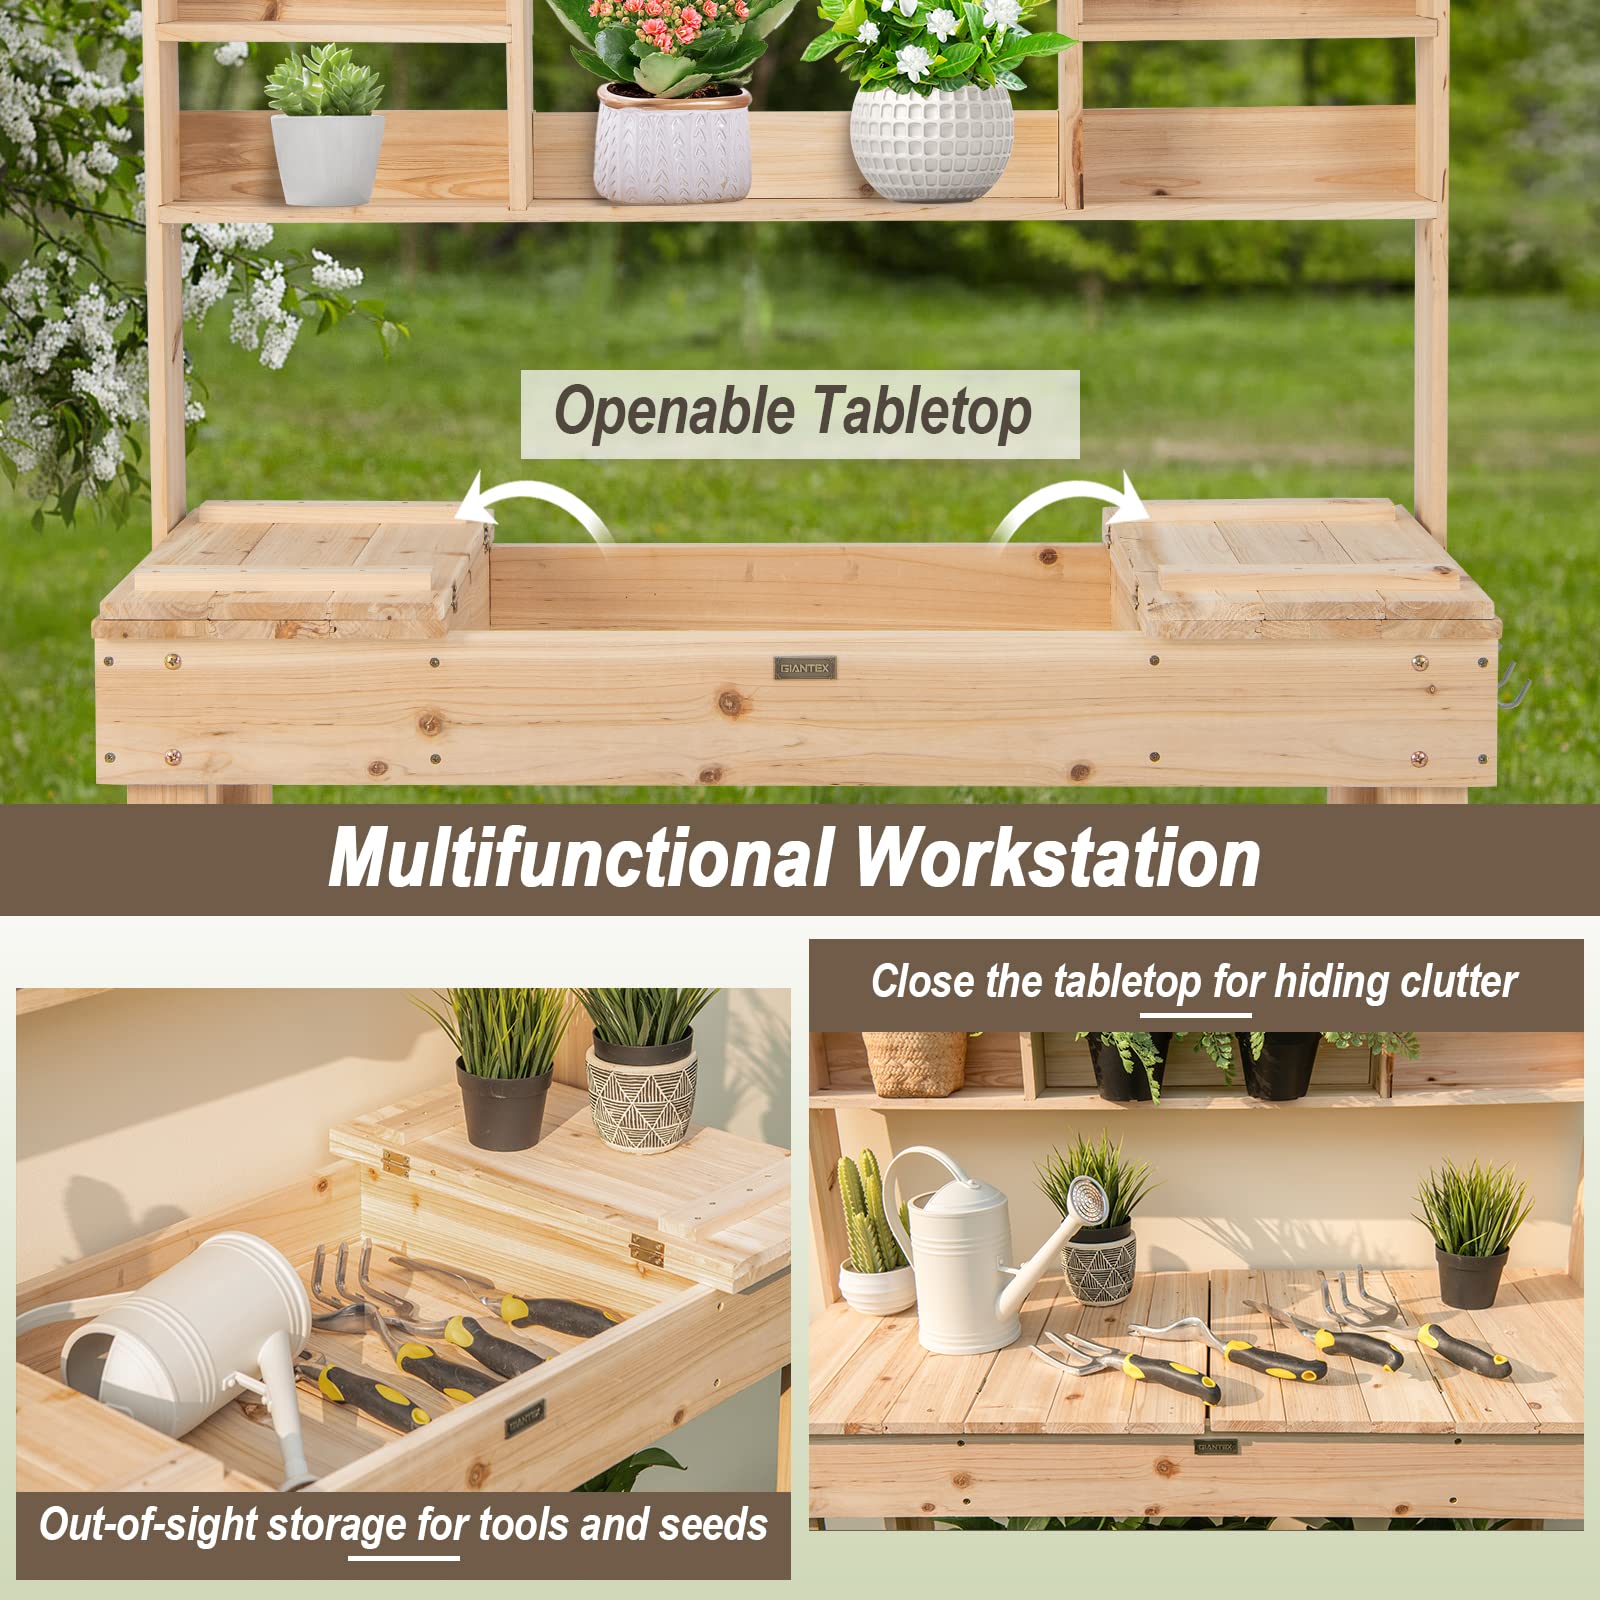 Giantex Garden Potting Bench Table, Large Workbench Table with Shelves, 43.5"x19.5"x 60.5"